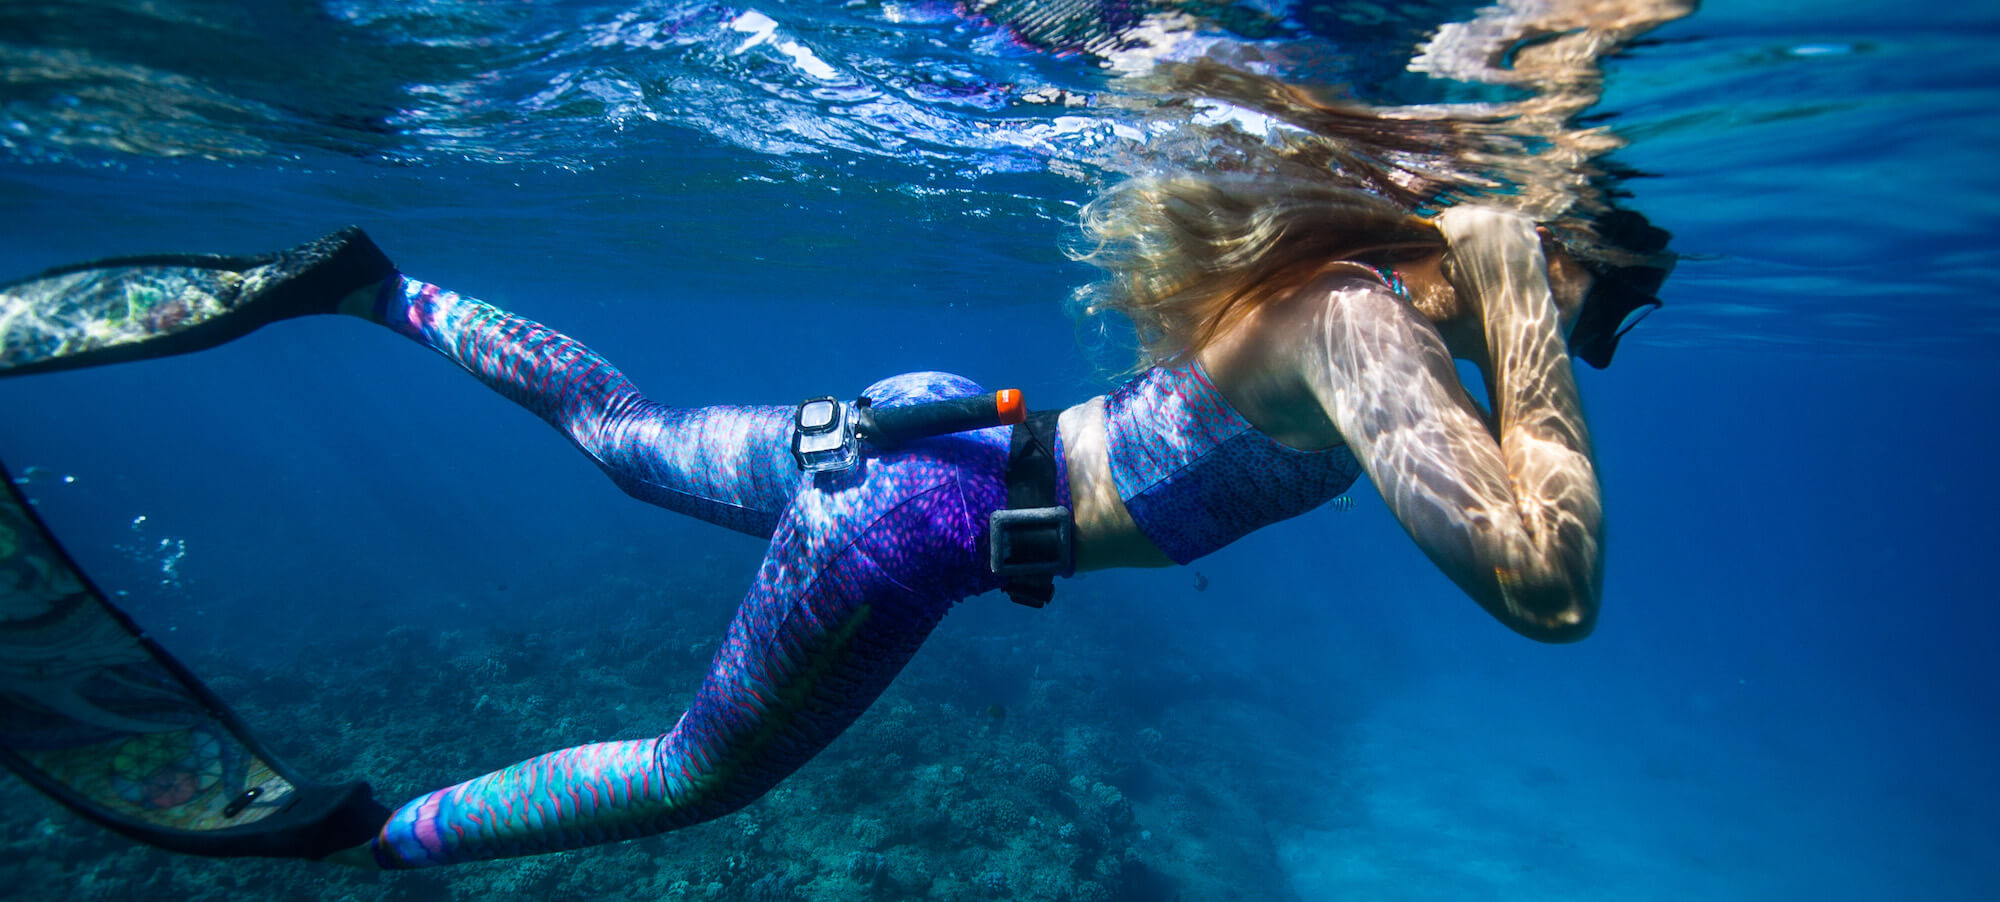 Waterlust - Eco-responsible apparel advocating for marine conservation